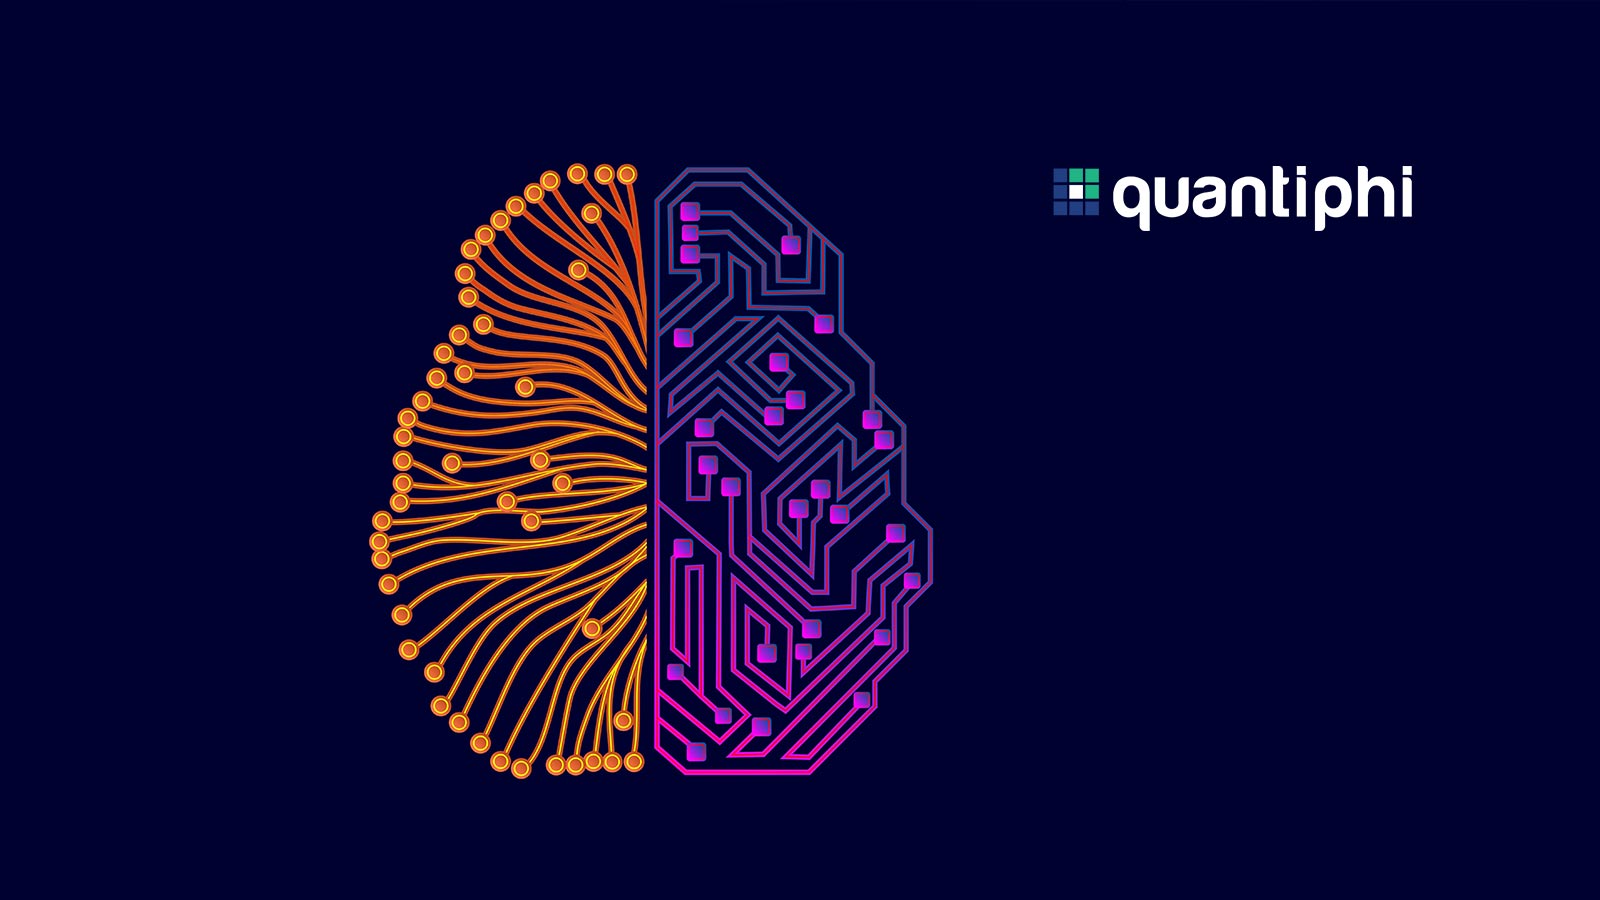 Quantiphi Named as an IDC Innovator in Artificial Intelligence